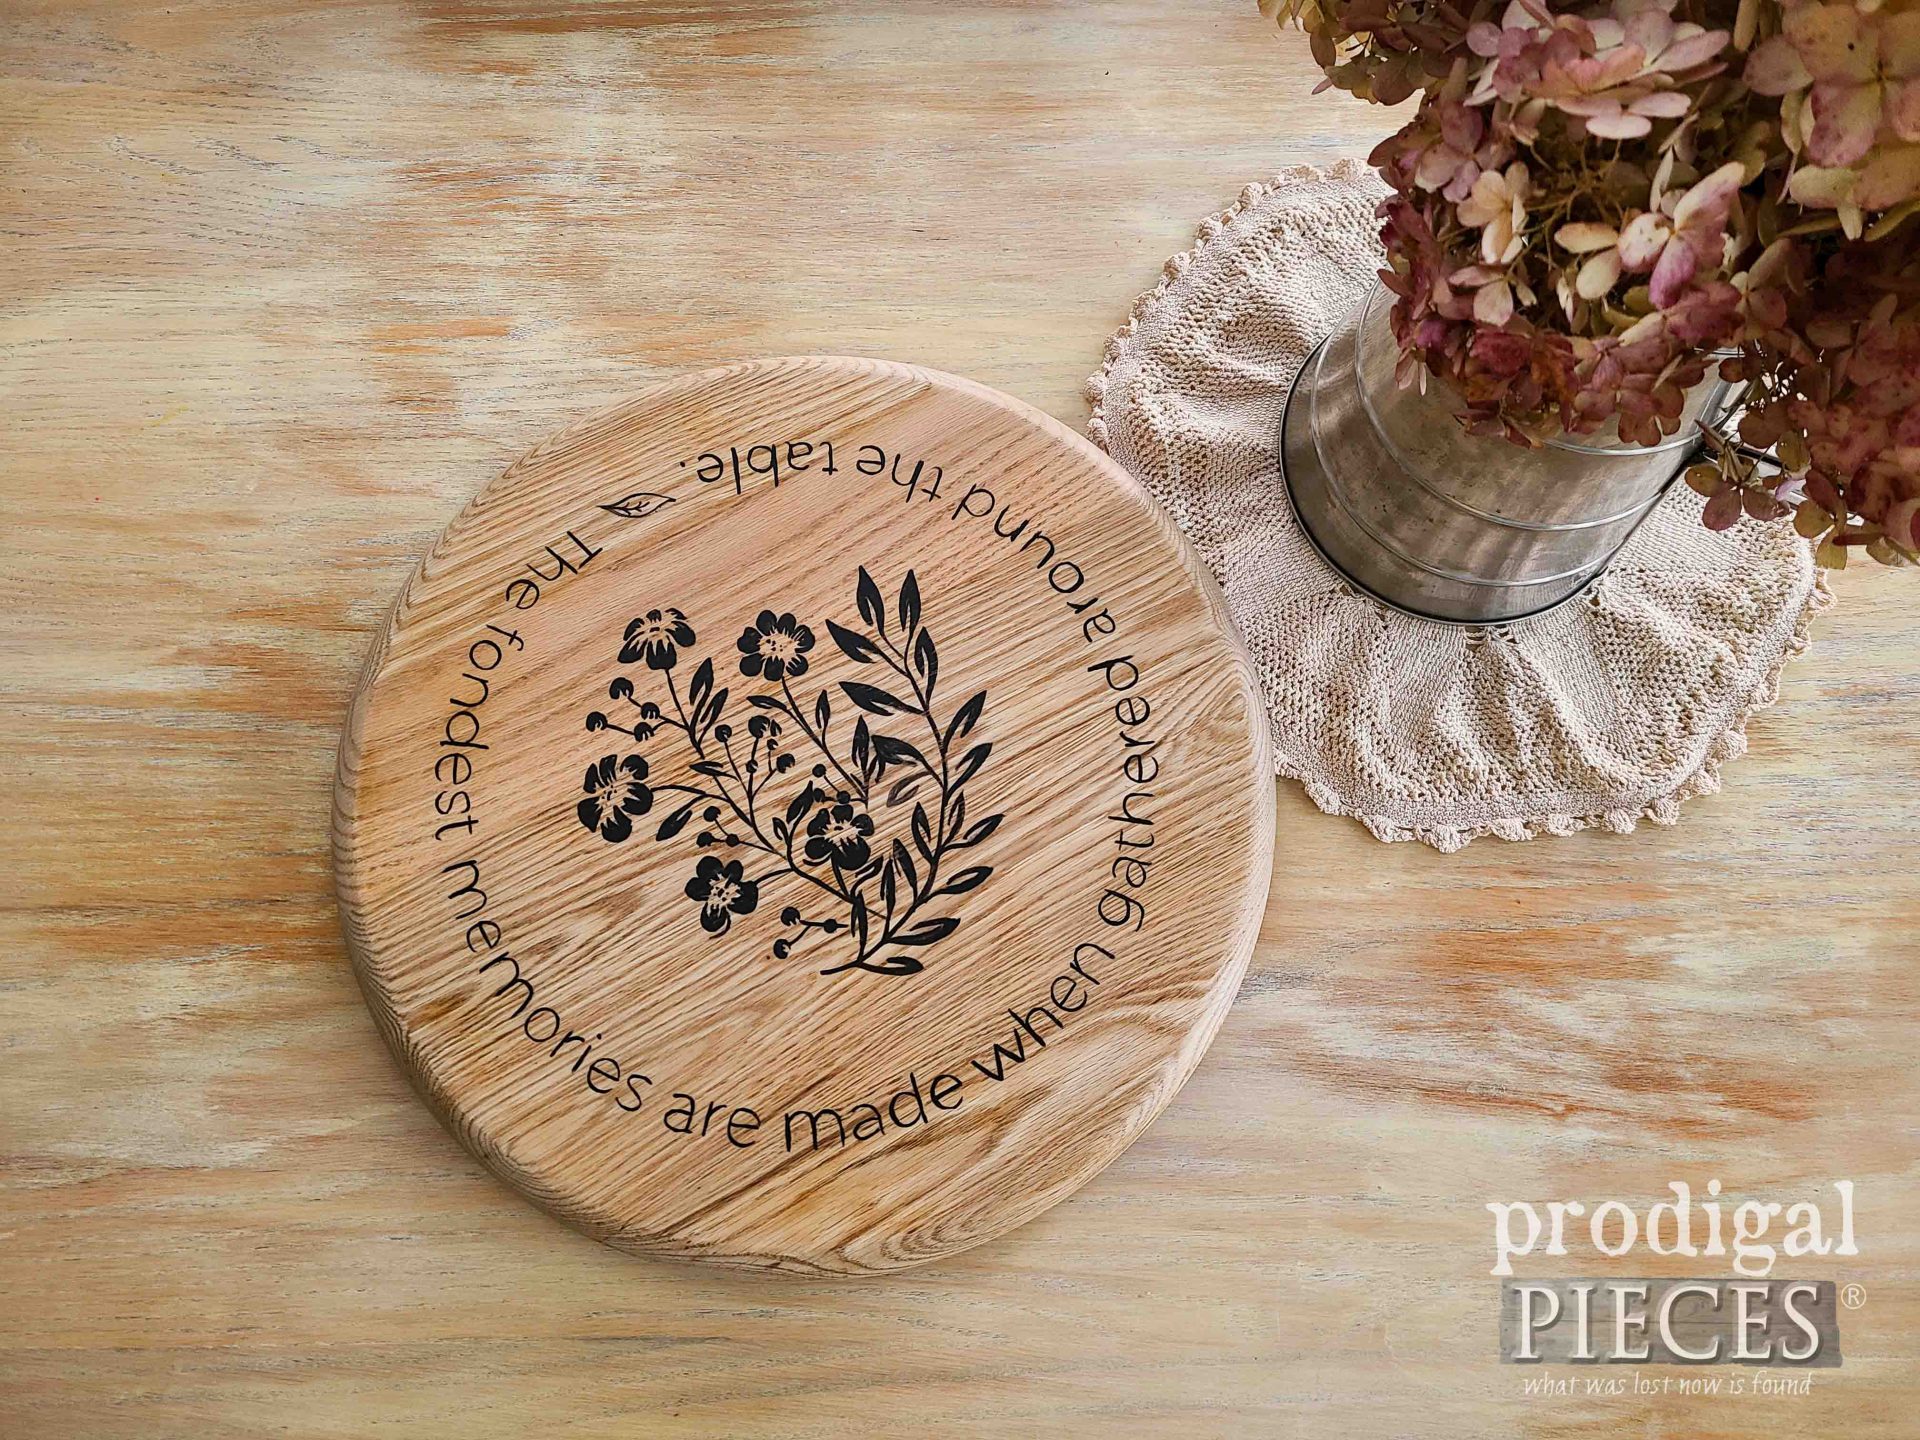 Solid Oak Hand-Painted Lazy Susan Upcycled by Larissa of Prodigal Pieces | prodigalpieces.com #prodigalpieces #farmhouse #kitchen #diy #home